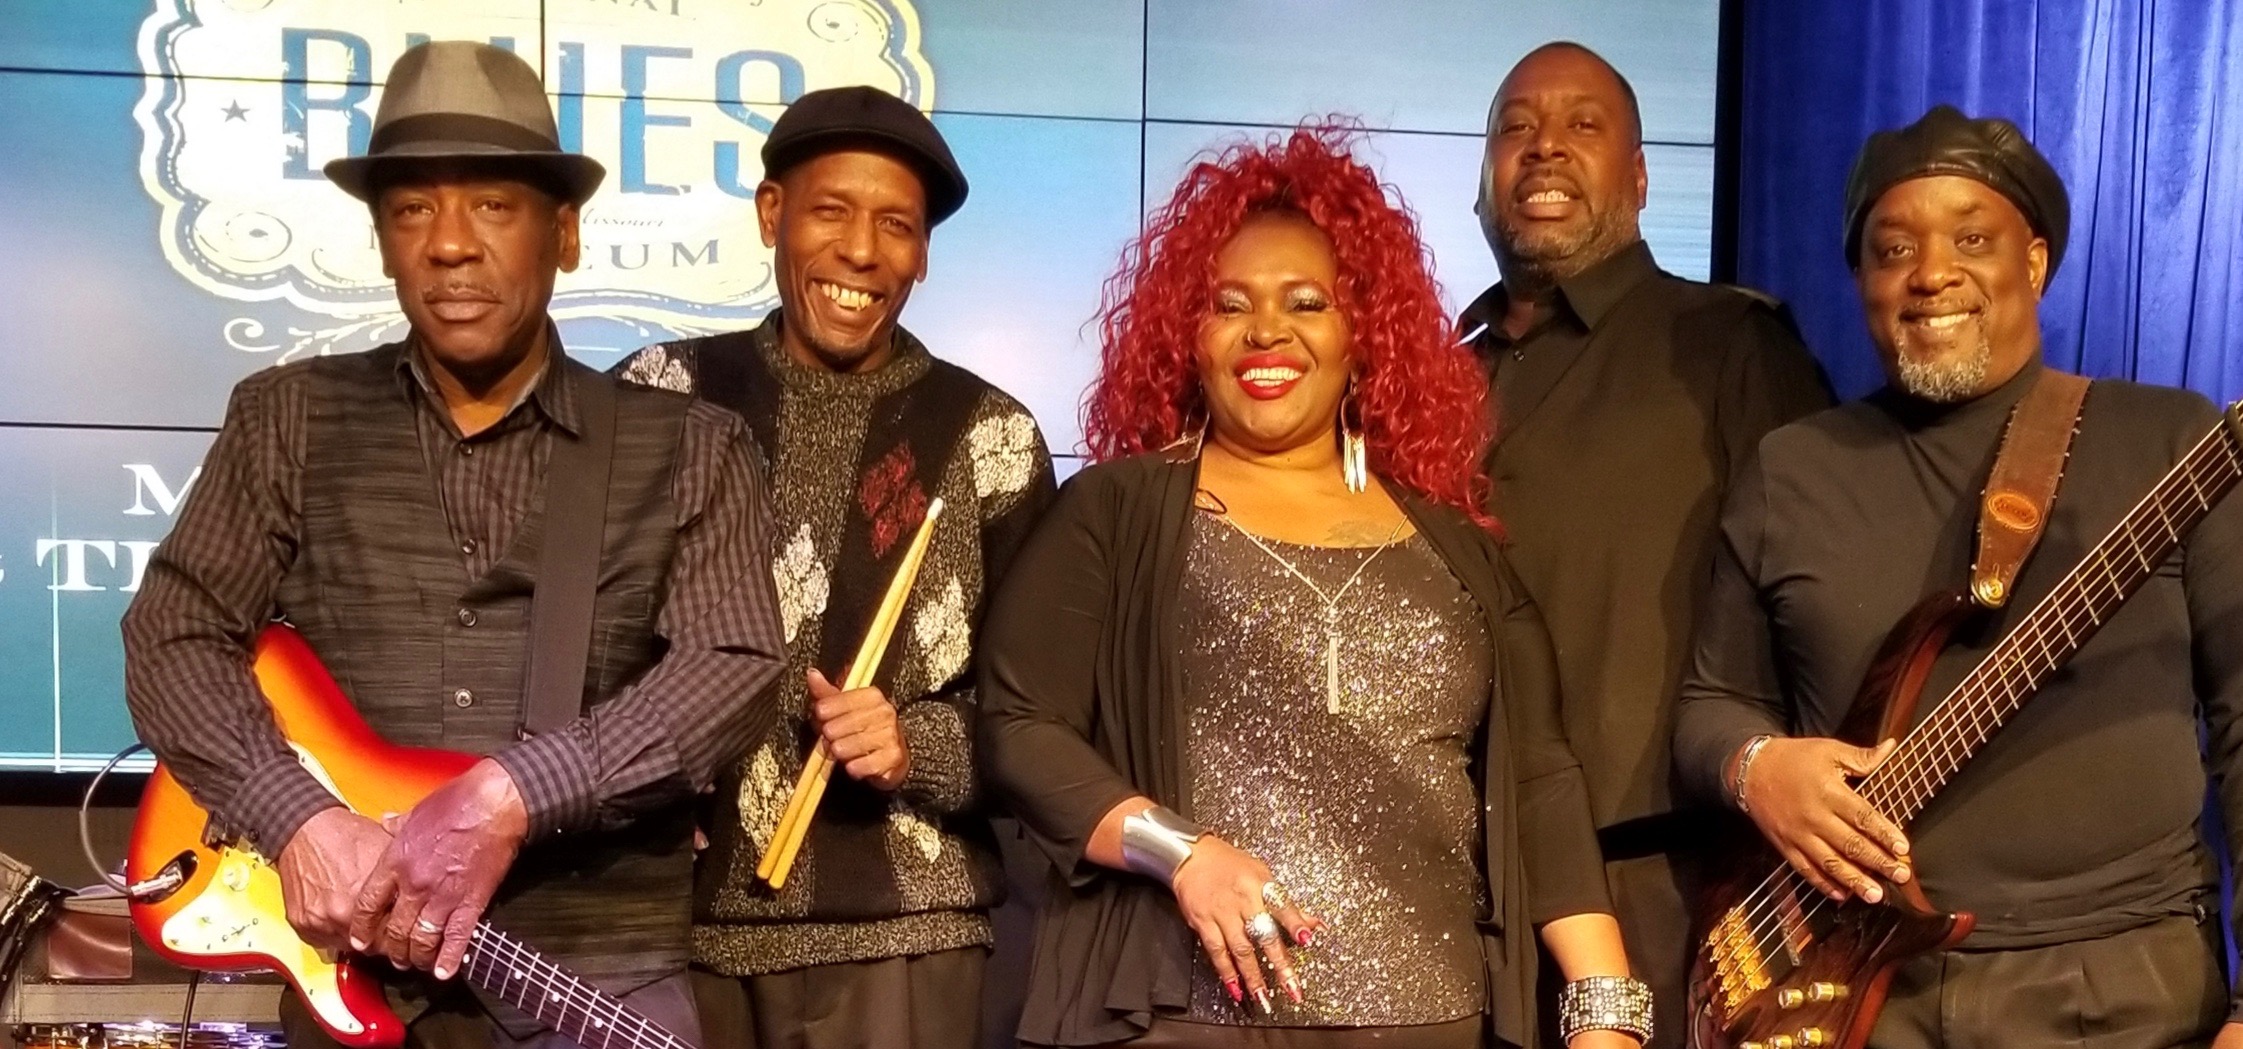 Ms. Silky Sol & the Real Players, Live, No Cover! 9-1 a.m.